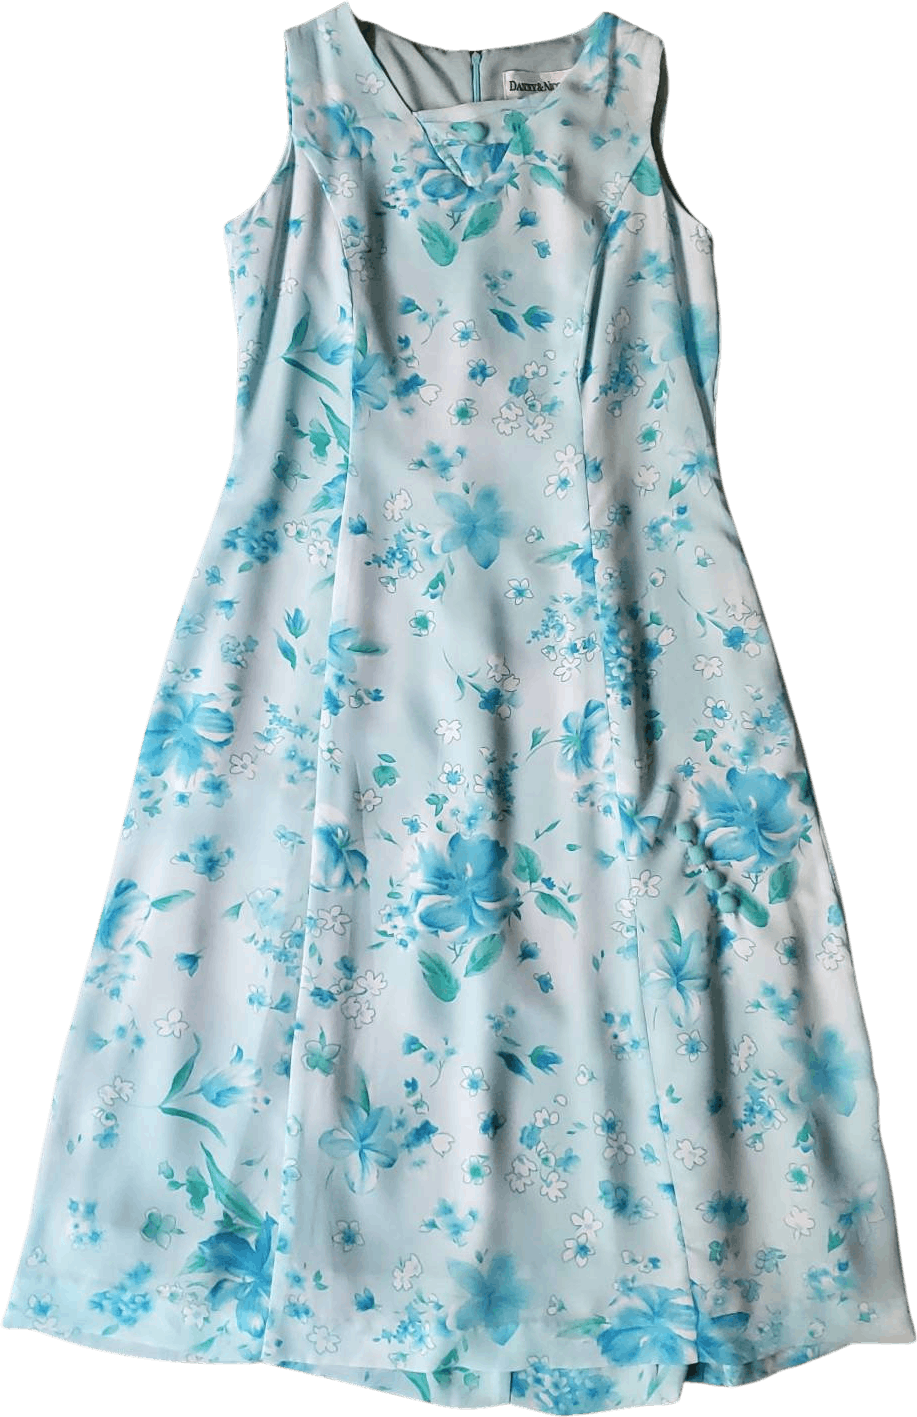 Vintage 90’s Blue and Green Watercolor Floral Chiffon Dress by Danny ...